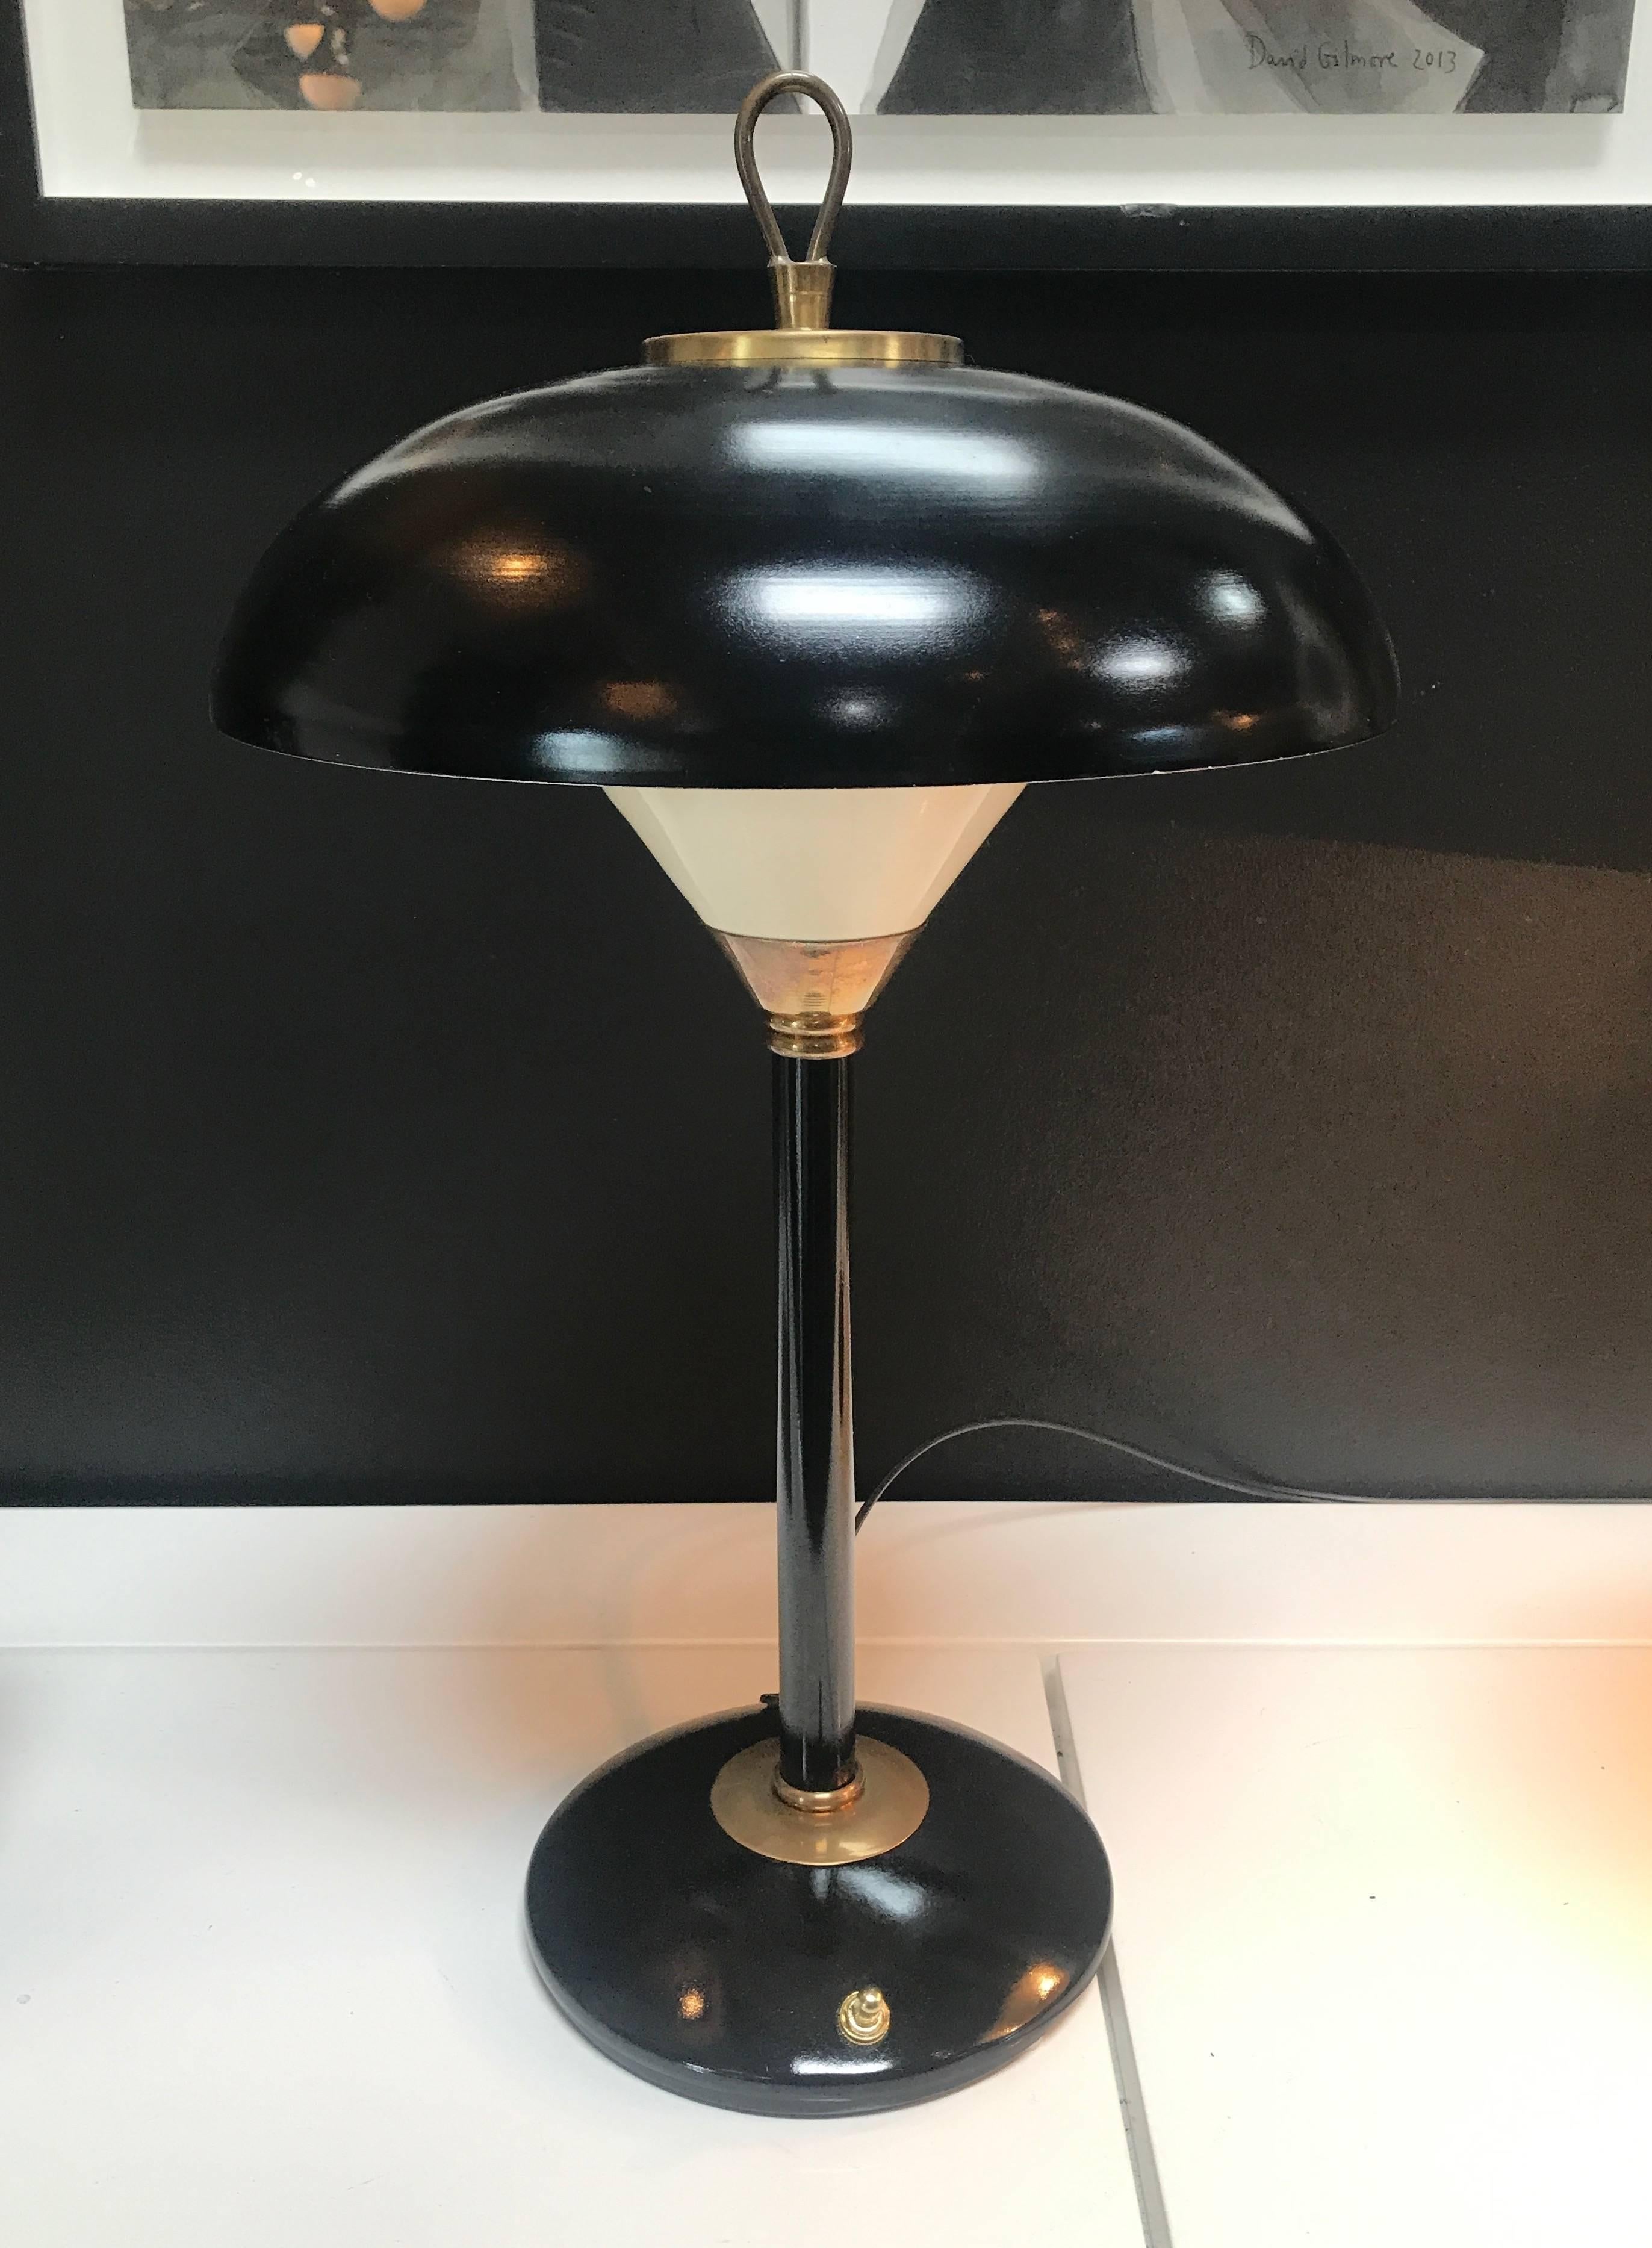 Midcentury Italian brass desk lamp with a black lacquered metal dome.